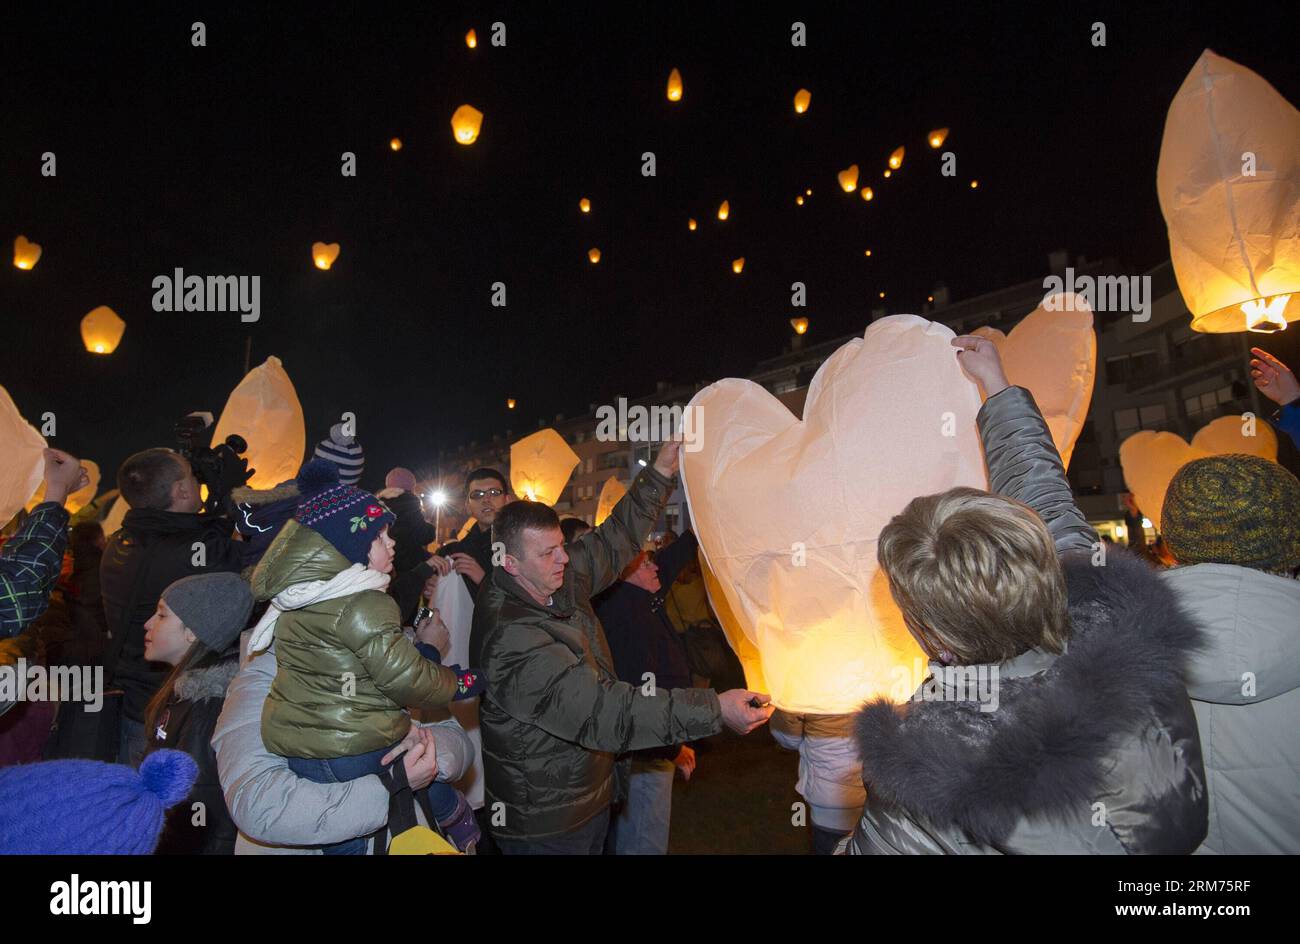 People fly lanterns into the night sky during the Lampionovo Lantern Festival in Zapresic, Croatia, Feb. 14, 2014. People released lanterns carrying their hopes and best wishes during the festival on Friday, and signed a huge Valentine s Day card to their twin town of Kastela. (Xinhua/Miso Lisanin) (zhf) CROATIA-ZAPRESIC-LANTERN FESTIVAL PUBLICATIONxNOTxINxCHN   Celebrities Fly Lanterns into The Night Sky during The  Lantern Festival in  Croatia Feb 14 2014 Celebrities released Lanterns carrying their Hopes and Best wishes during The Festival ON Friday and signed a Huge Valentine S Day Card to Stock Photo